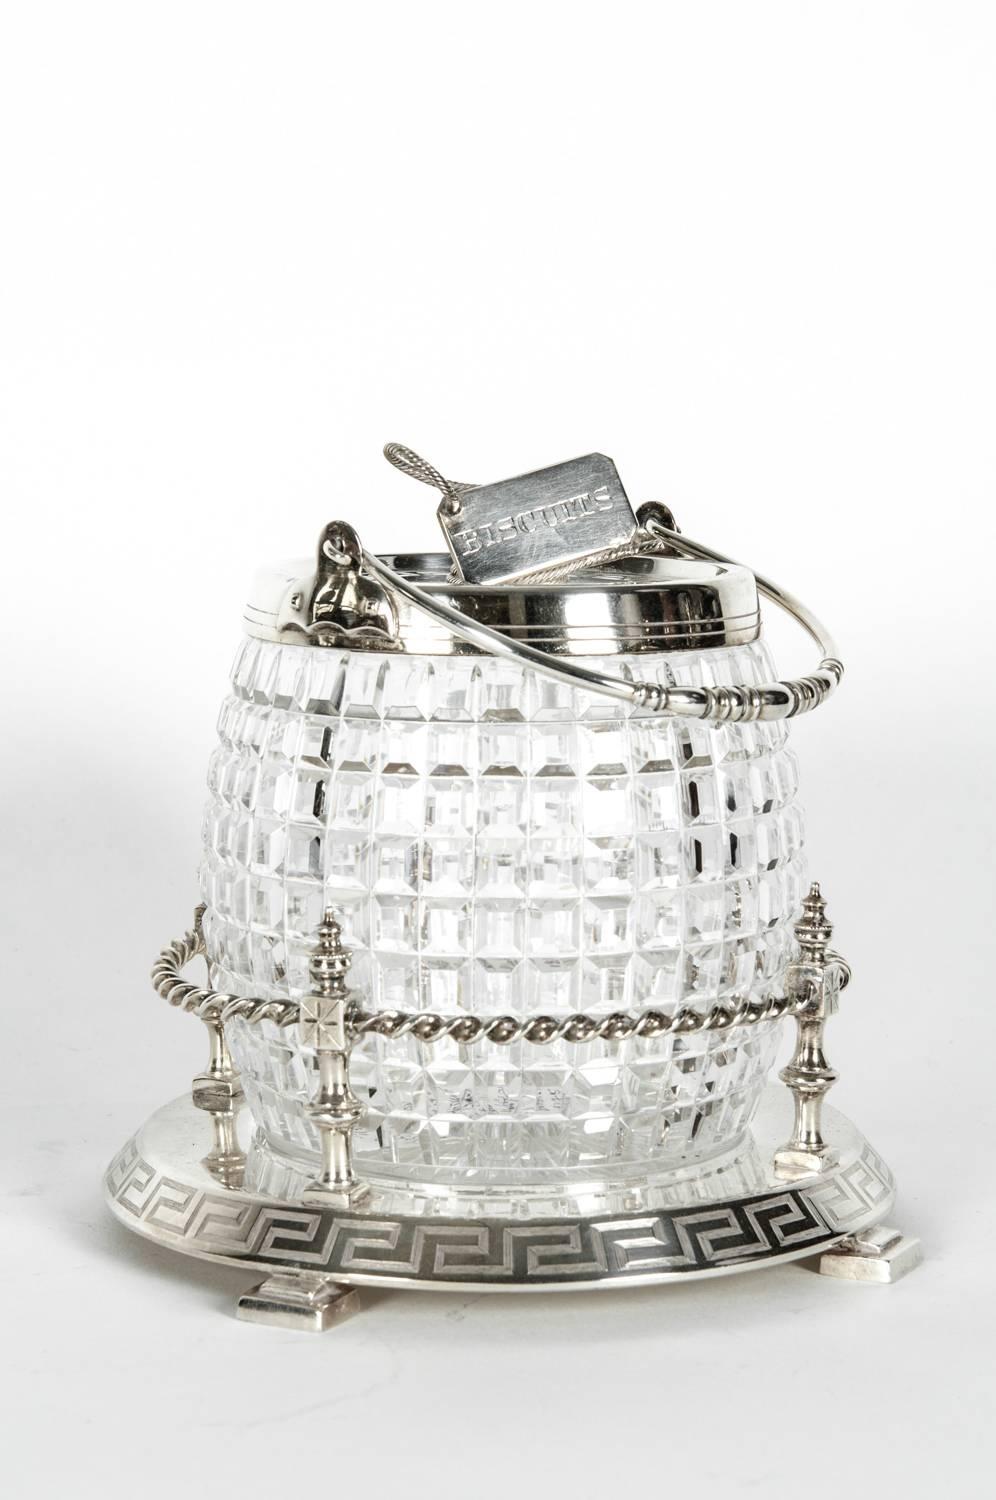 Antique English cut crystal barrel biscuit with detachable silver plate holding basket tray and cover. The piece measures 9 inches high to the handle and about 6 inches diameter. The silver plate holding basket tray is 8 diameter x 3 inches high.